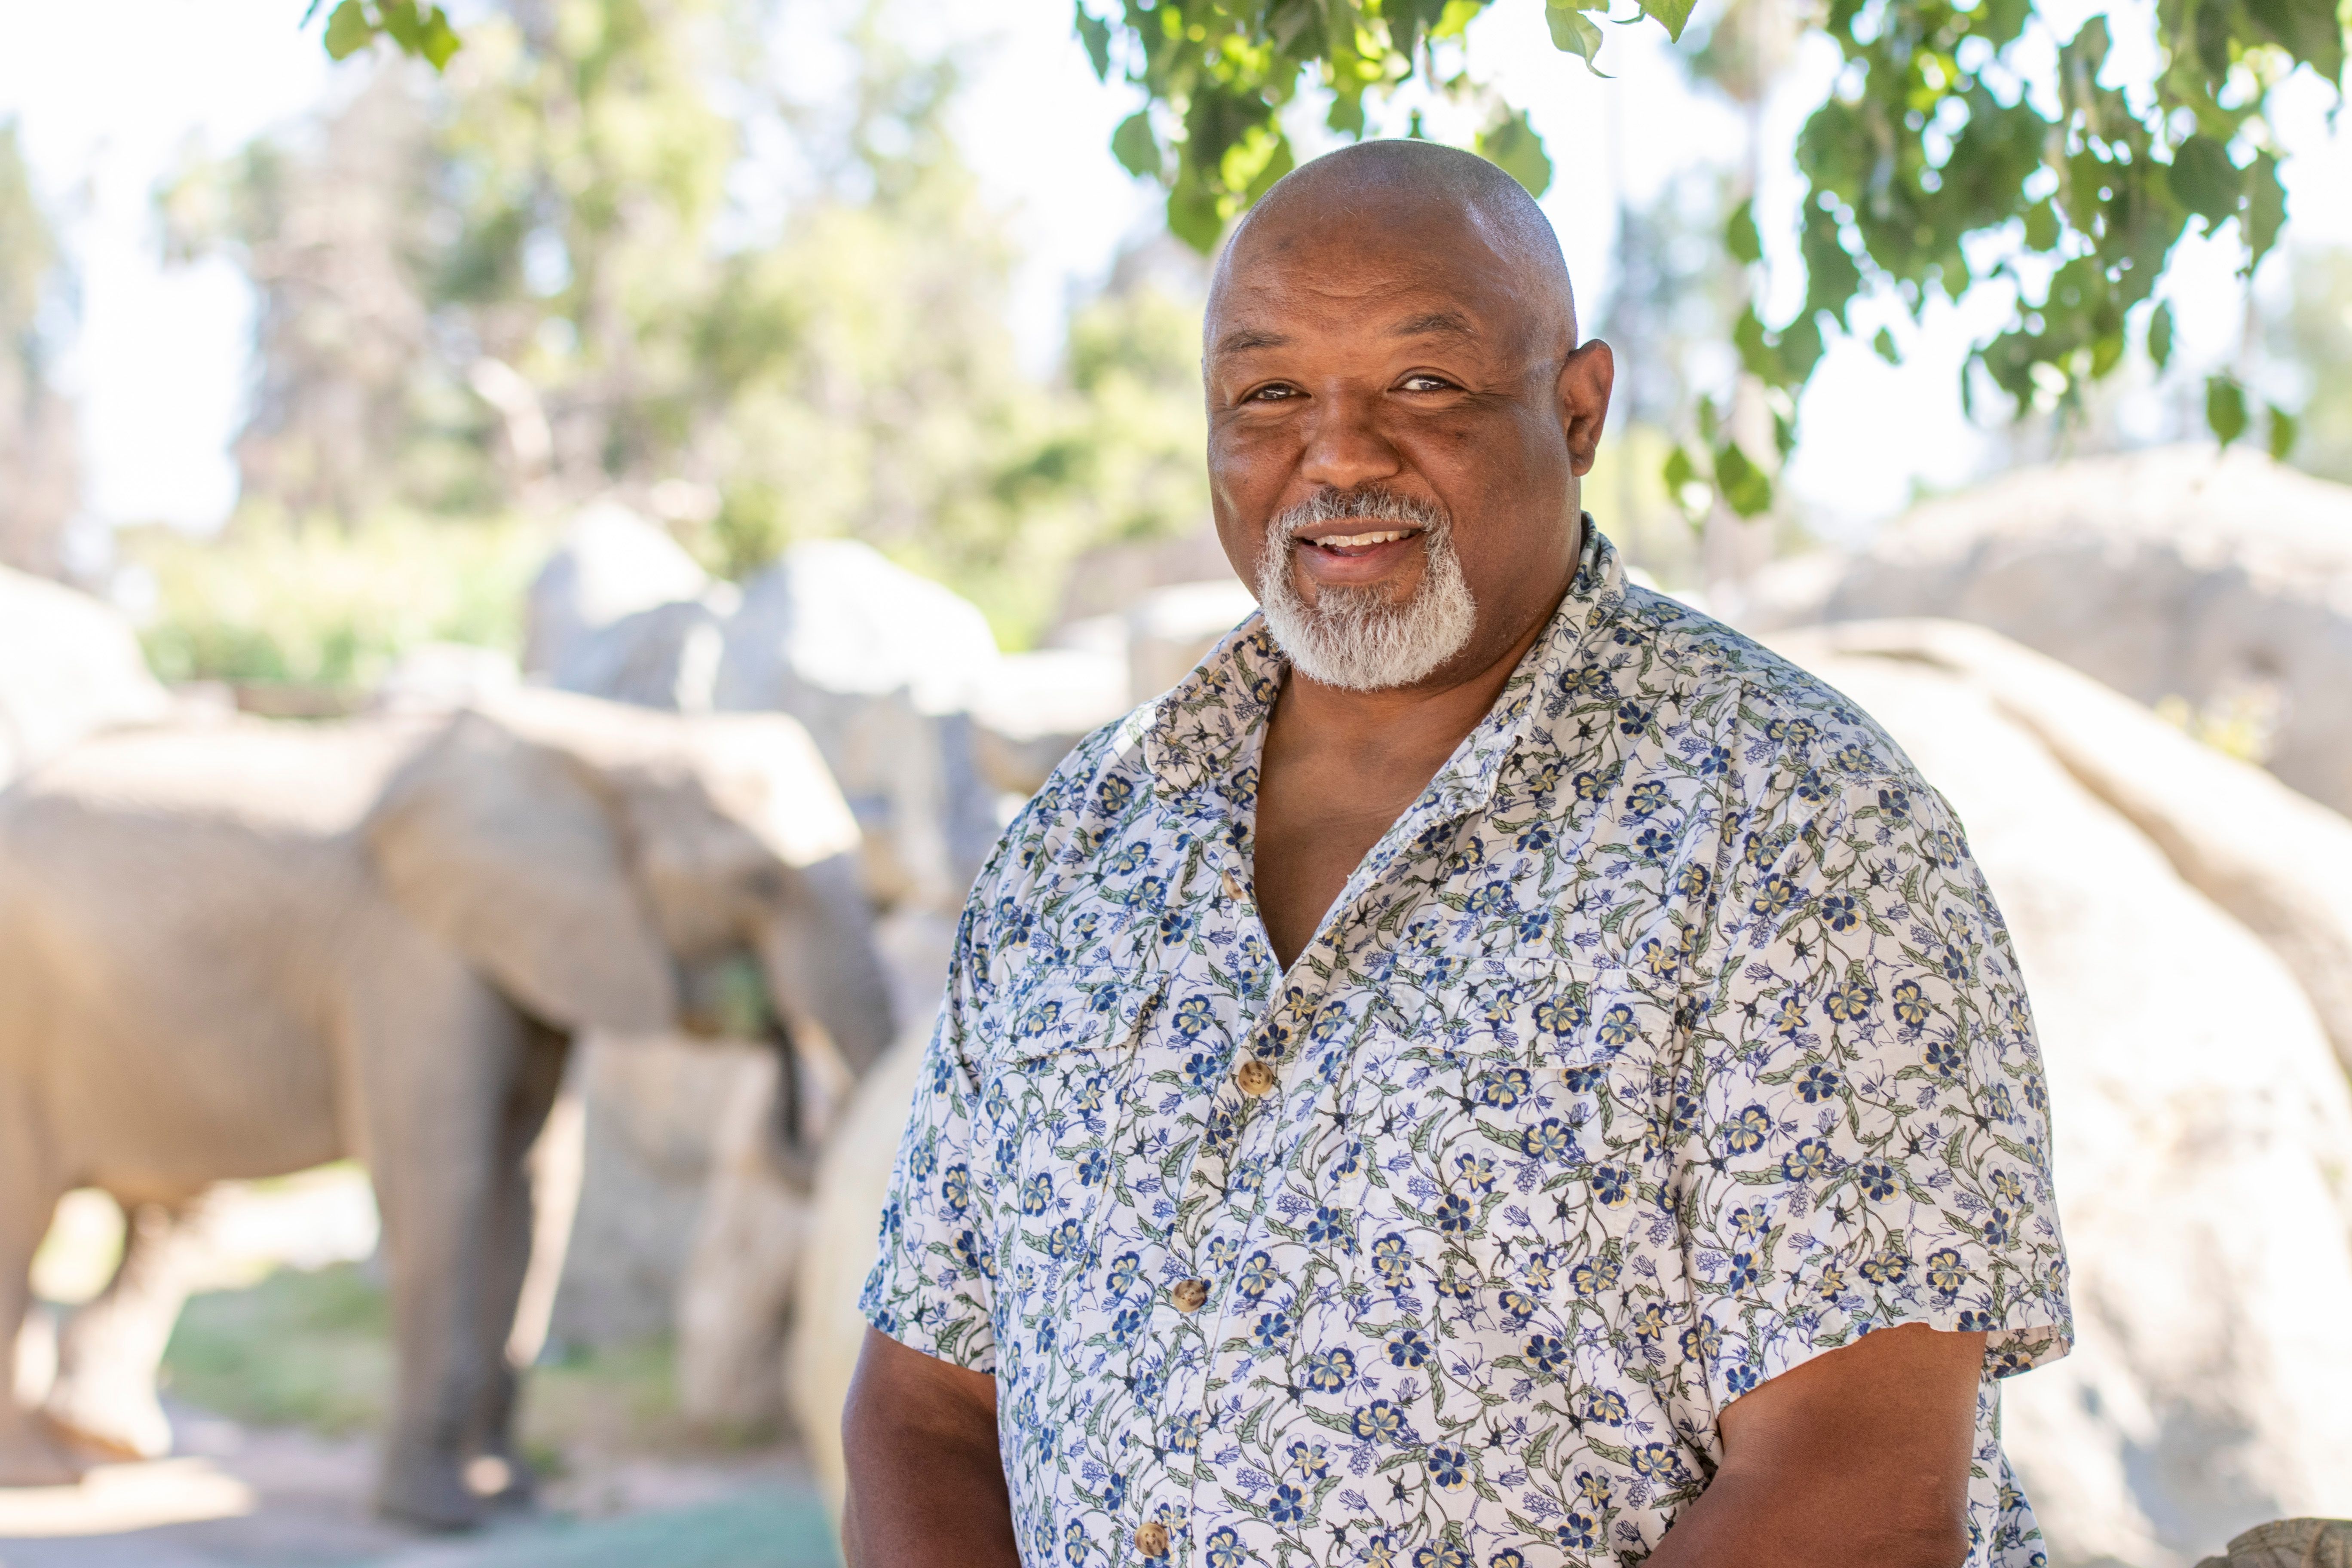 County Executive David Crowley Appoints Amos Morris as the New Director of the Milwaukee County Zoo